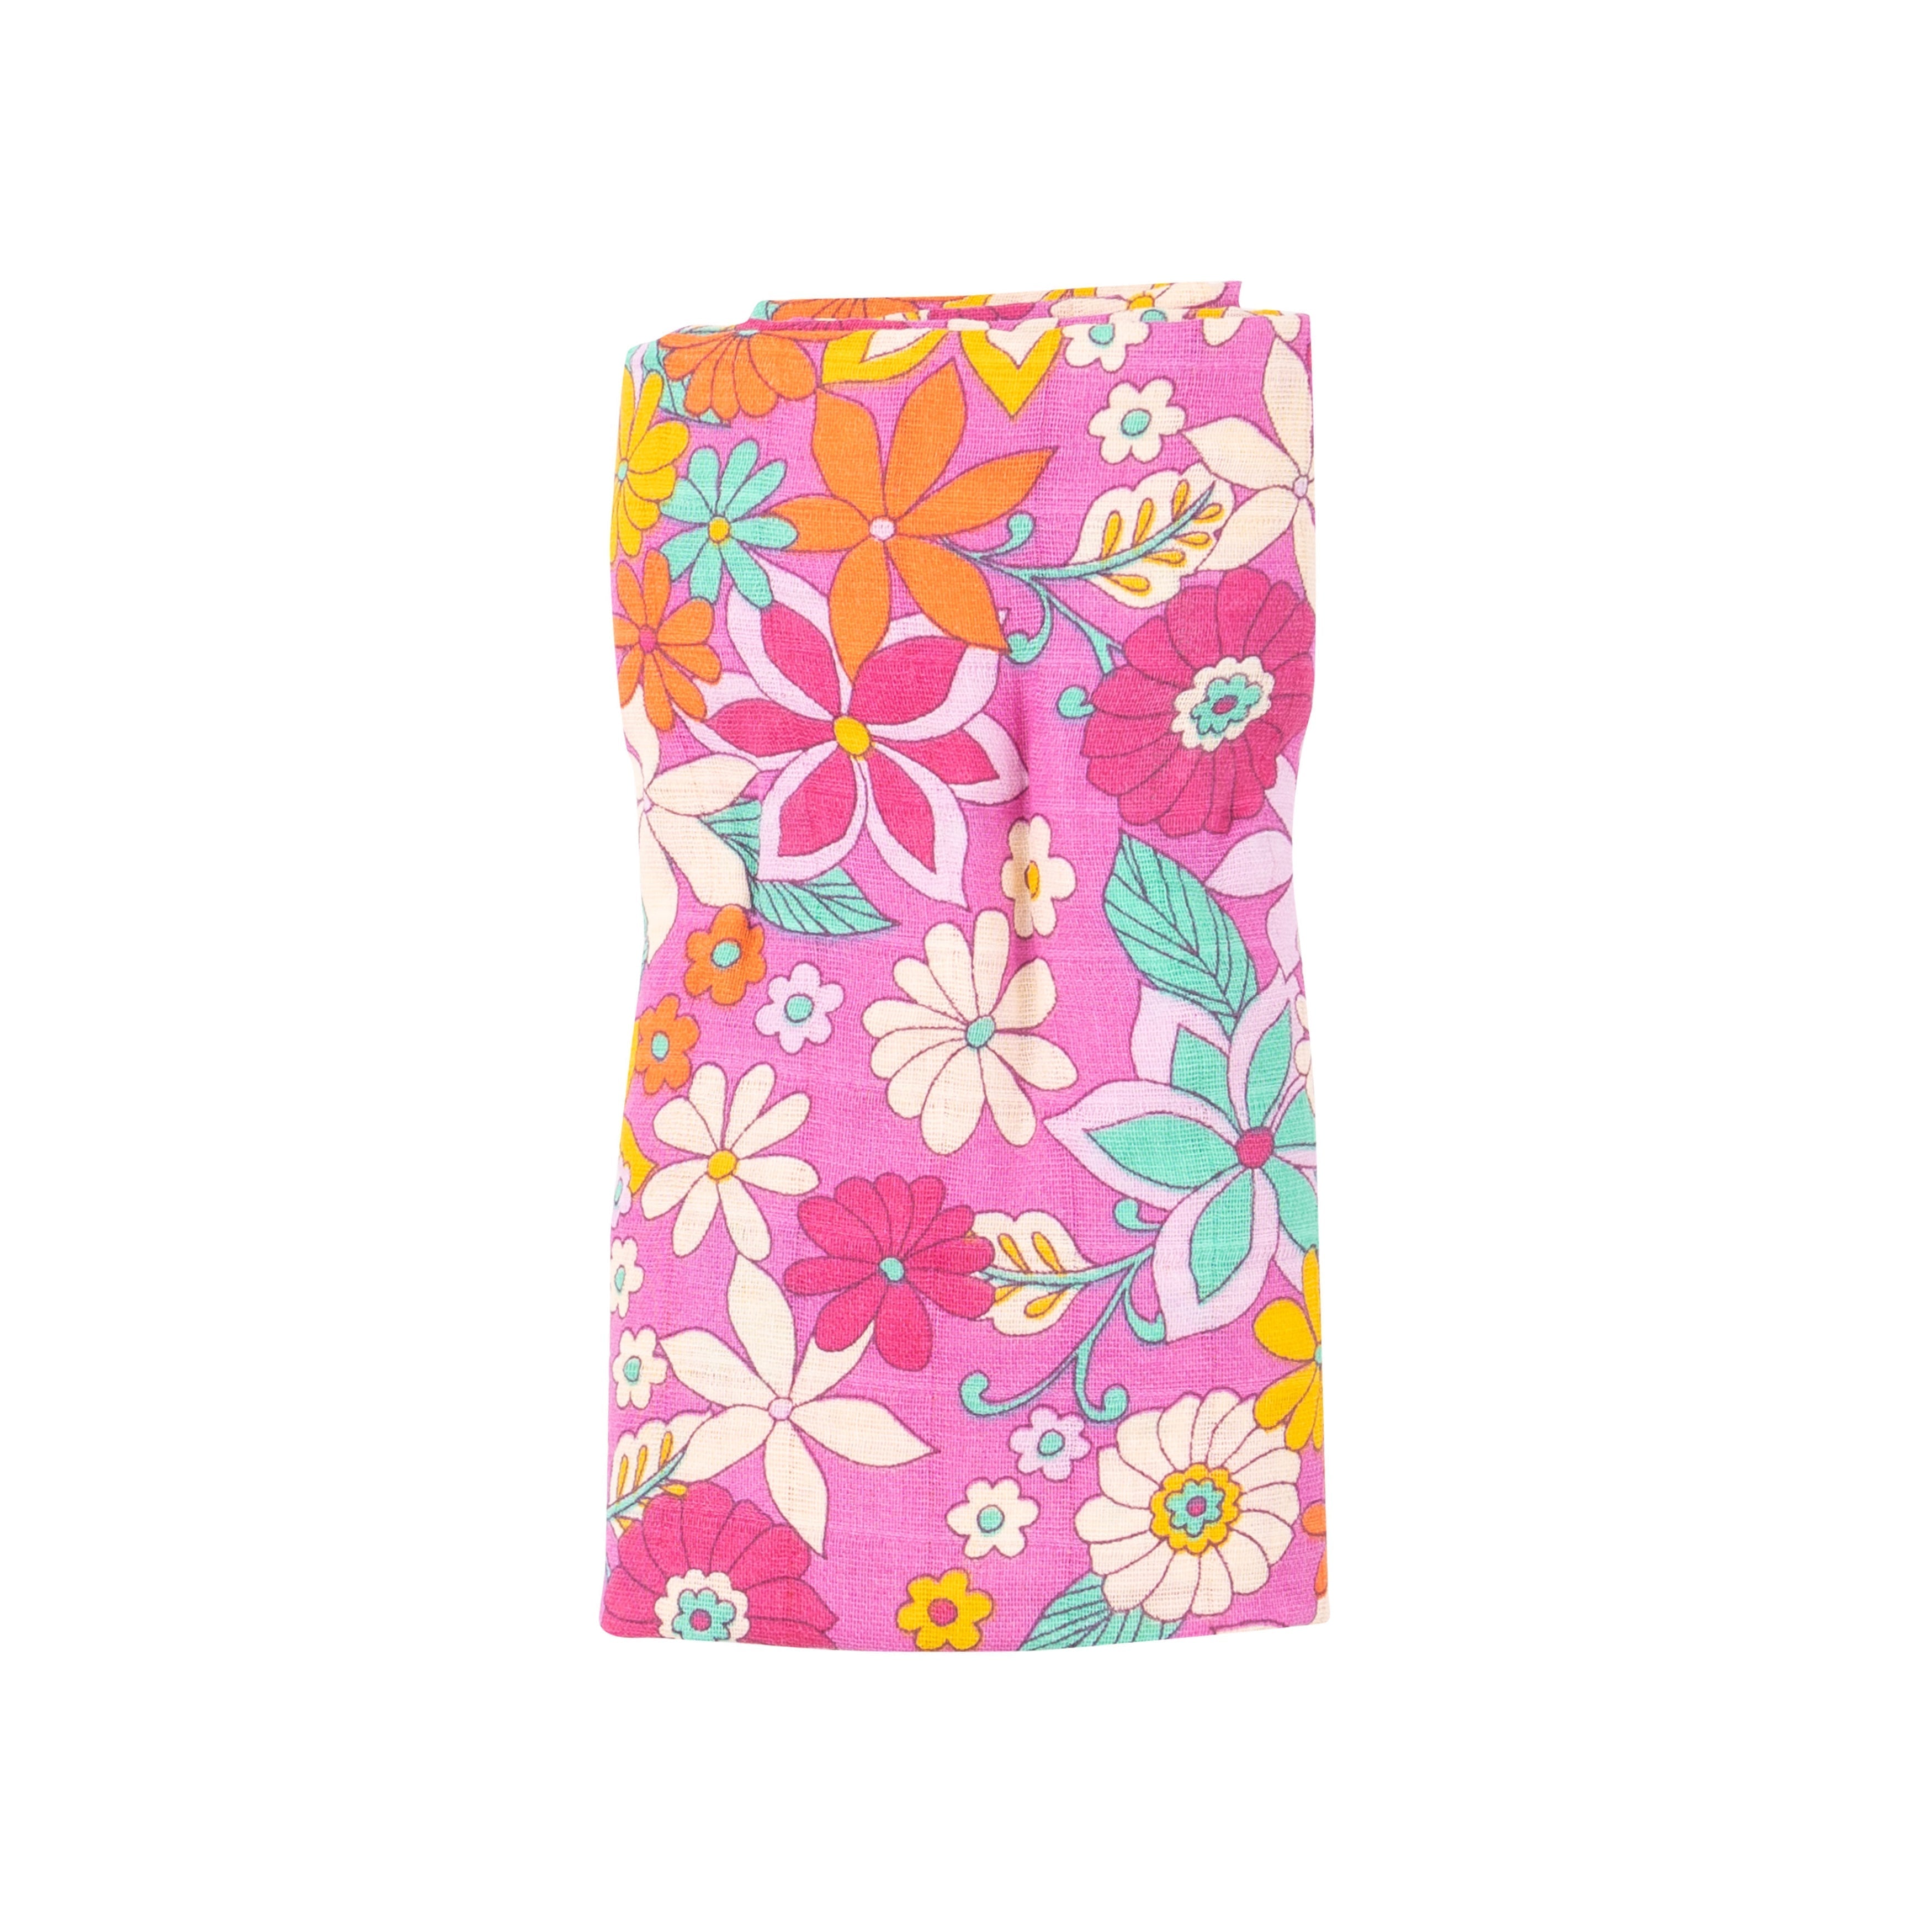 Swaddle Blanket - Tropical Retro Floral